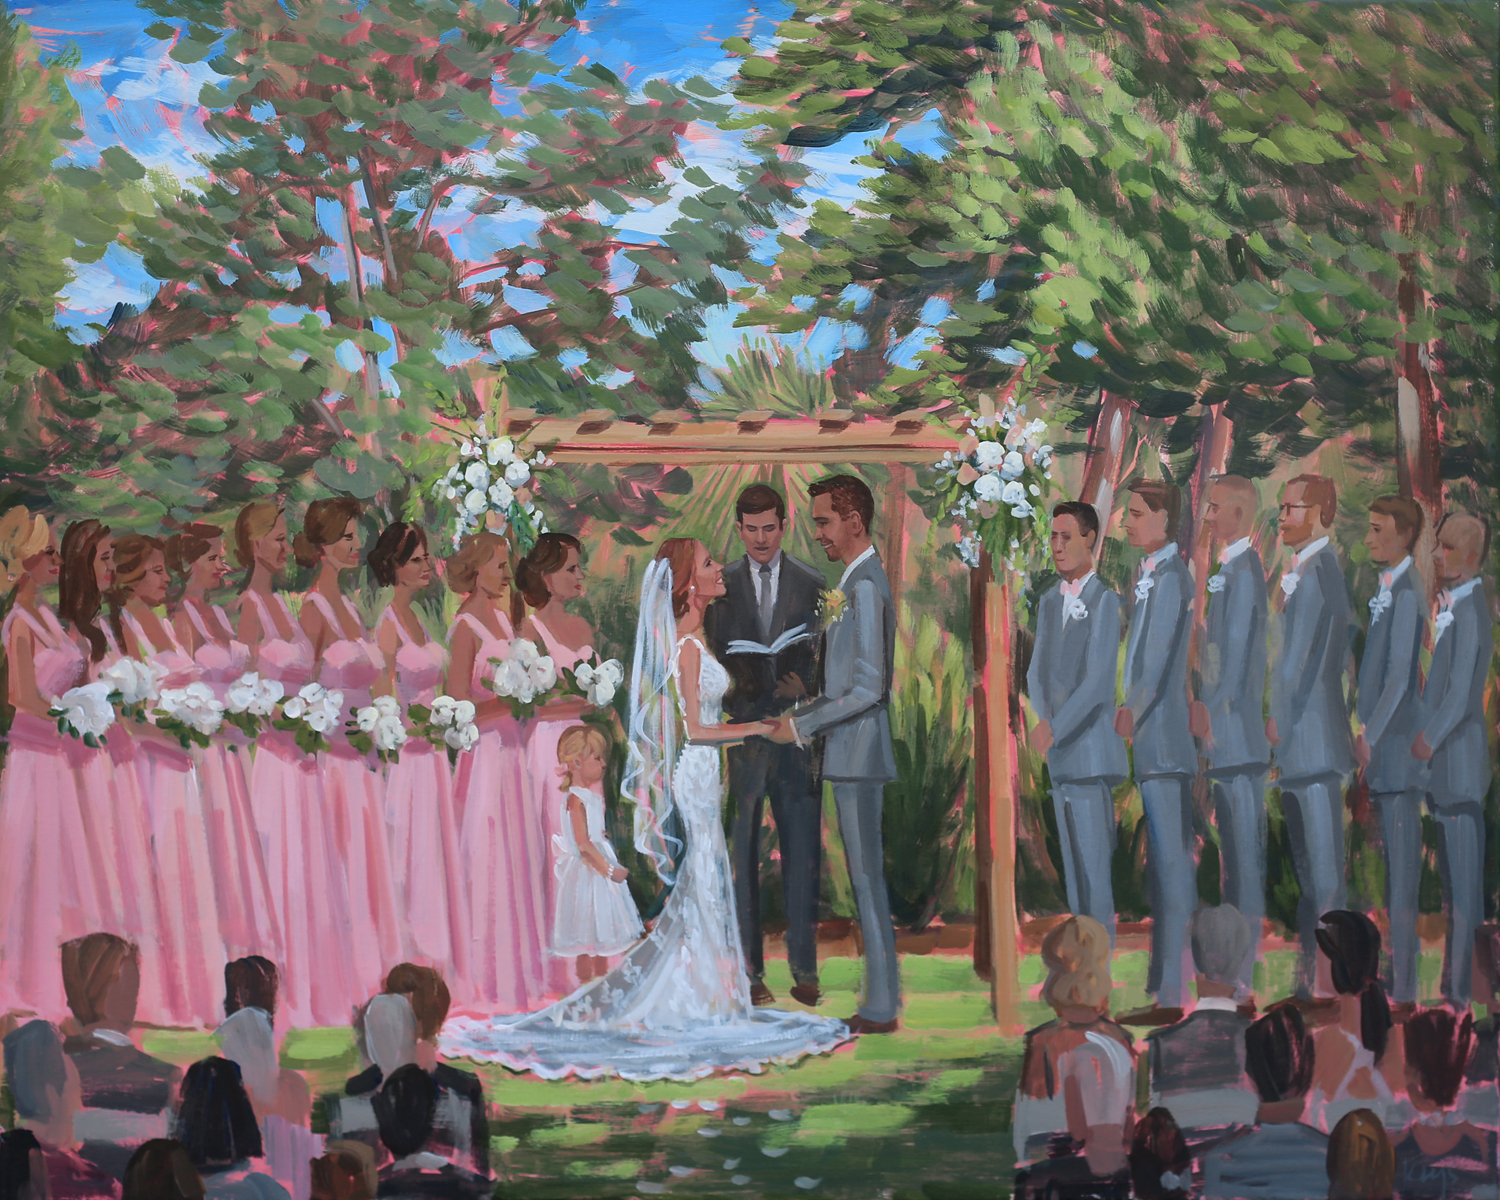 Wilmington Live Painter, Ben Keys, captured Jenna + Justin’s dreamy garden ceremony that was held at the New Hanover County Arboretum.